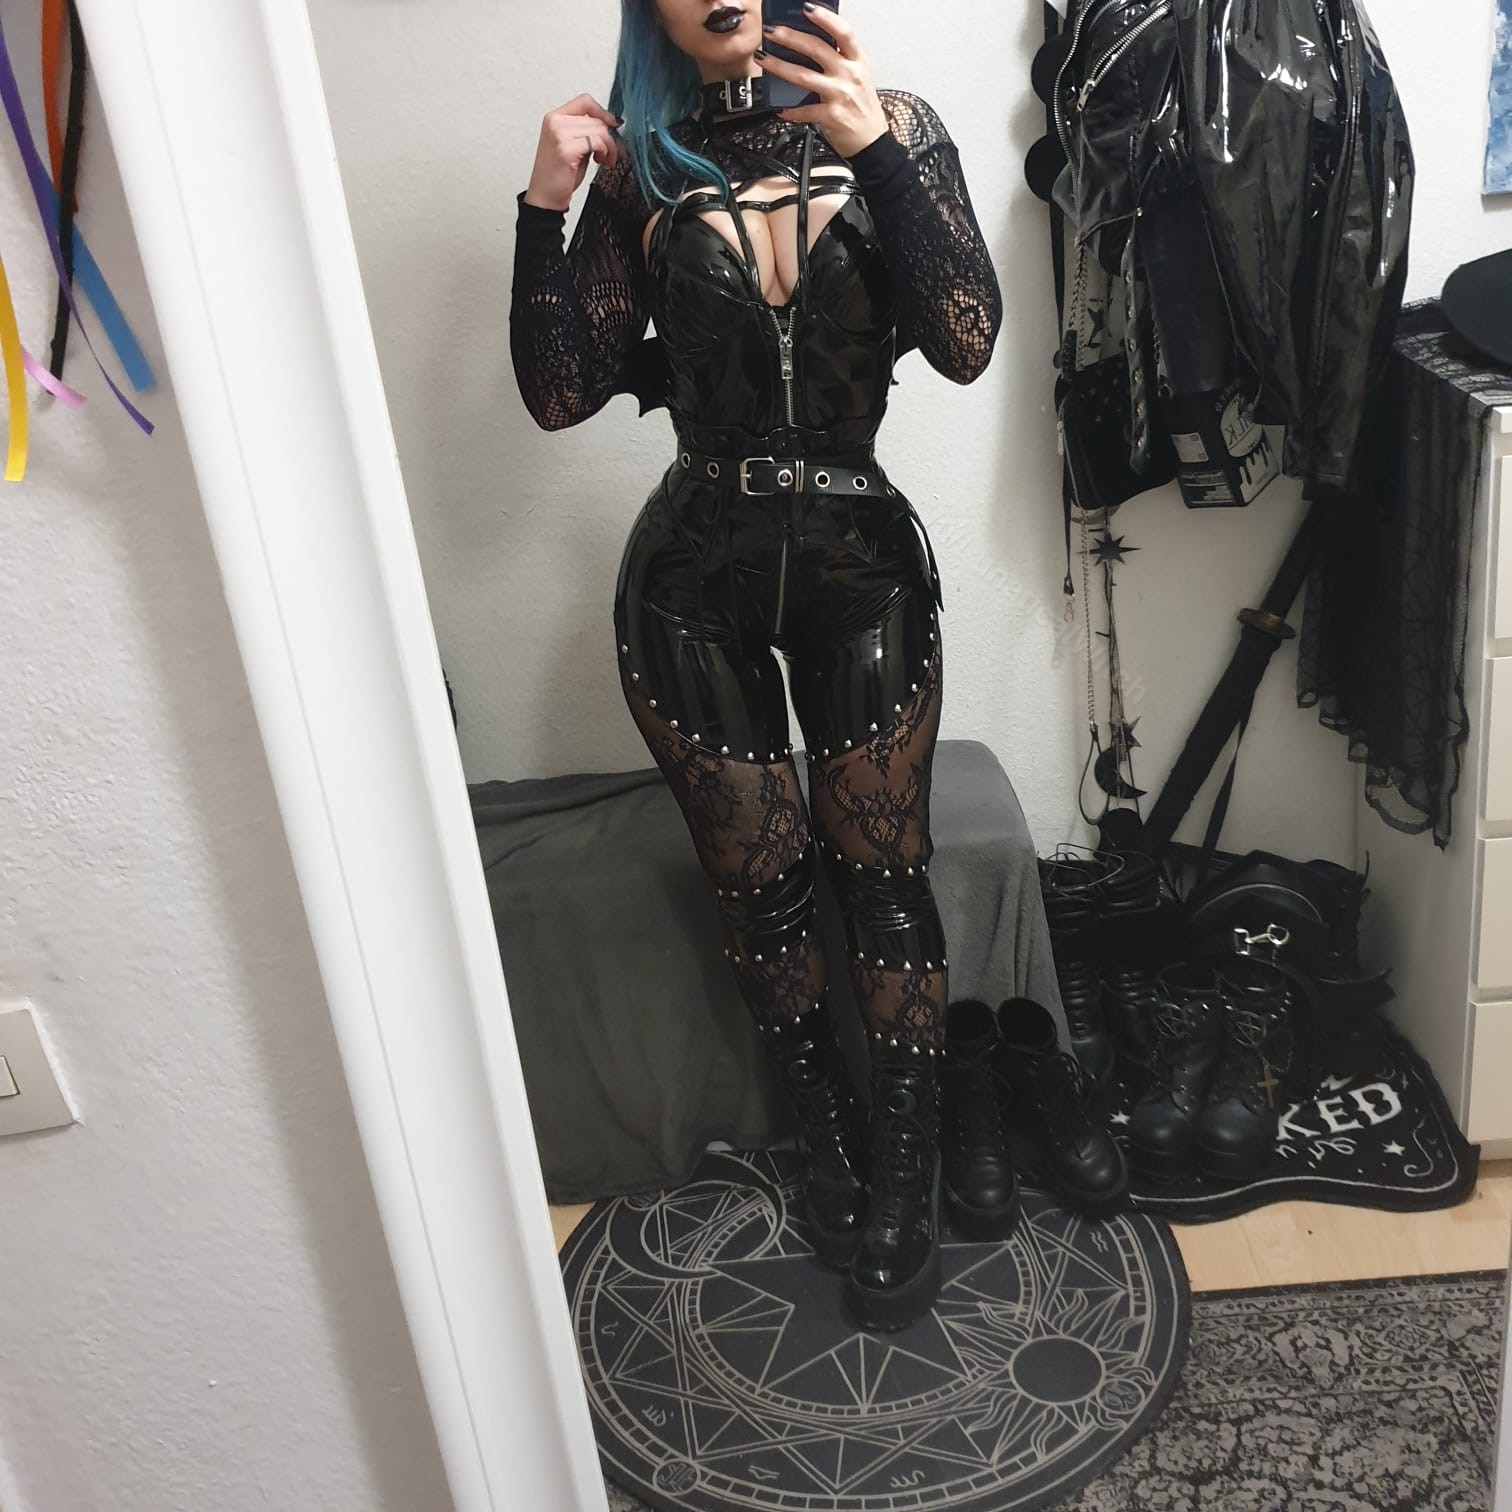 [OC] I Am Completely In Love With My New Outfit I Turned So Many Heads On My Way To Work Today 😈